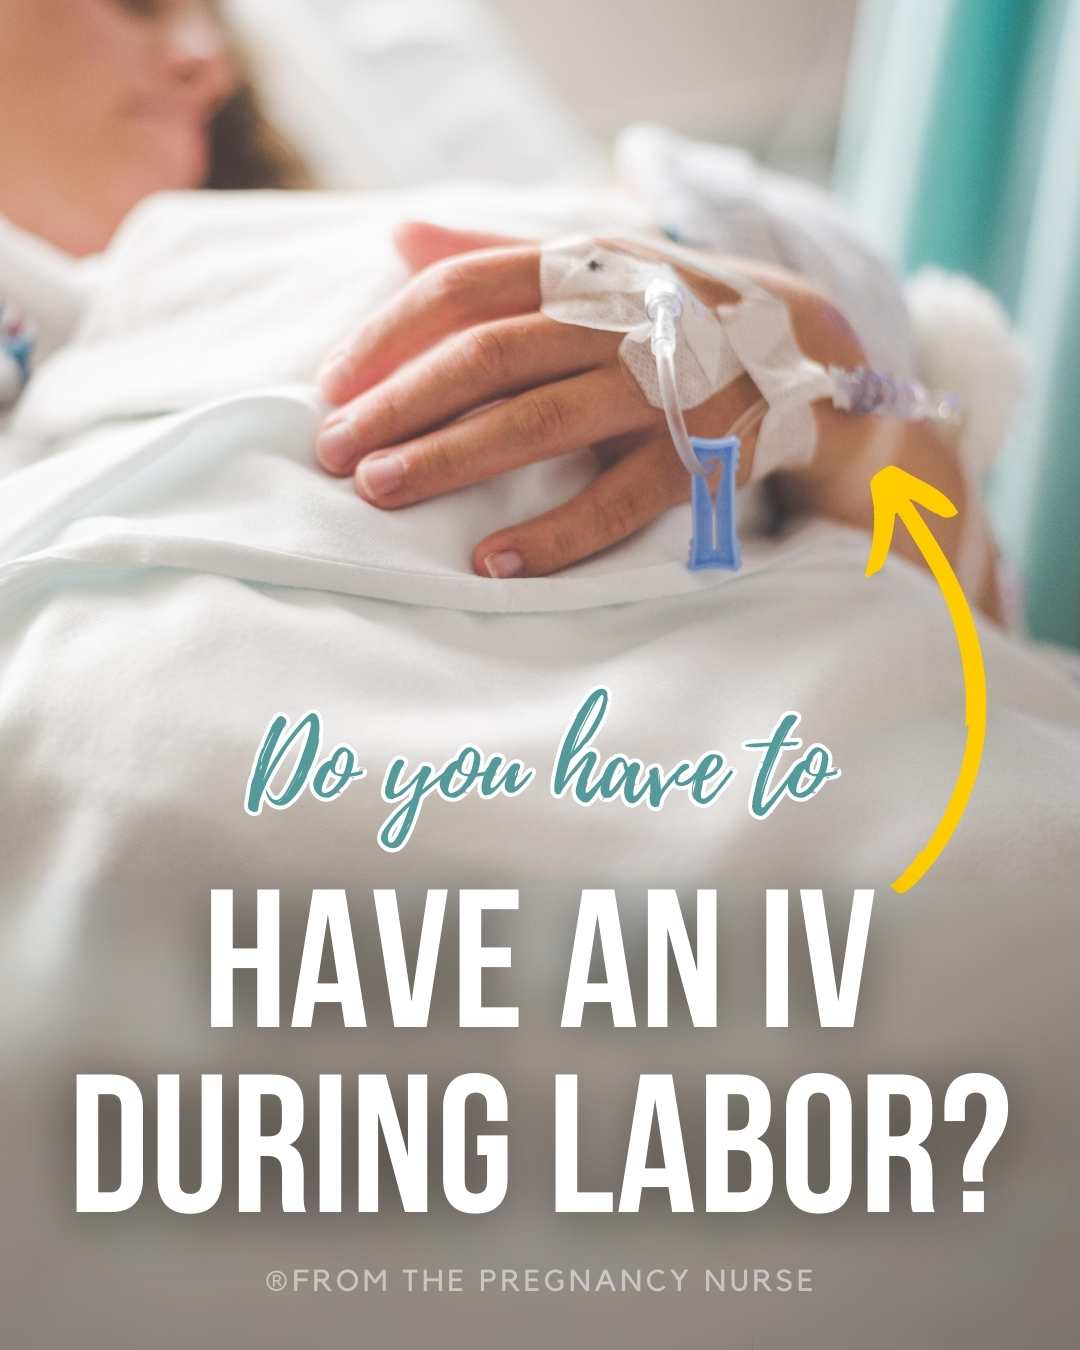 Delve into this informative guide on the IV during labor. Understand why it is recommended, when it becomes a necessity, what alternatives exist, and how to handle it should you decide against it. Plus, discover the unknown secret of the saline lock - a refreshing alternative for those who dislike the feeling of being hooked up to an IV.